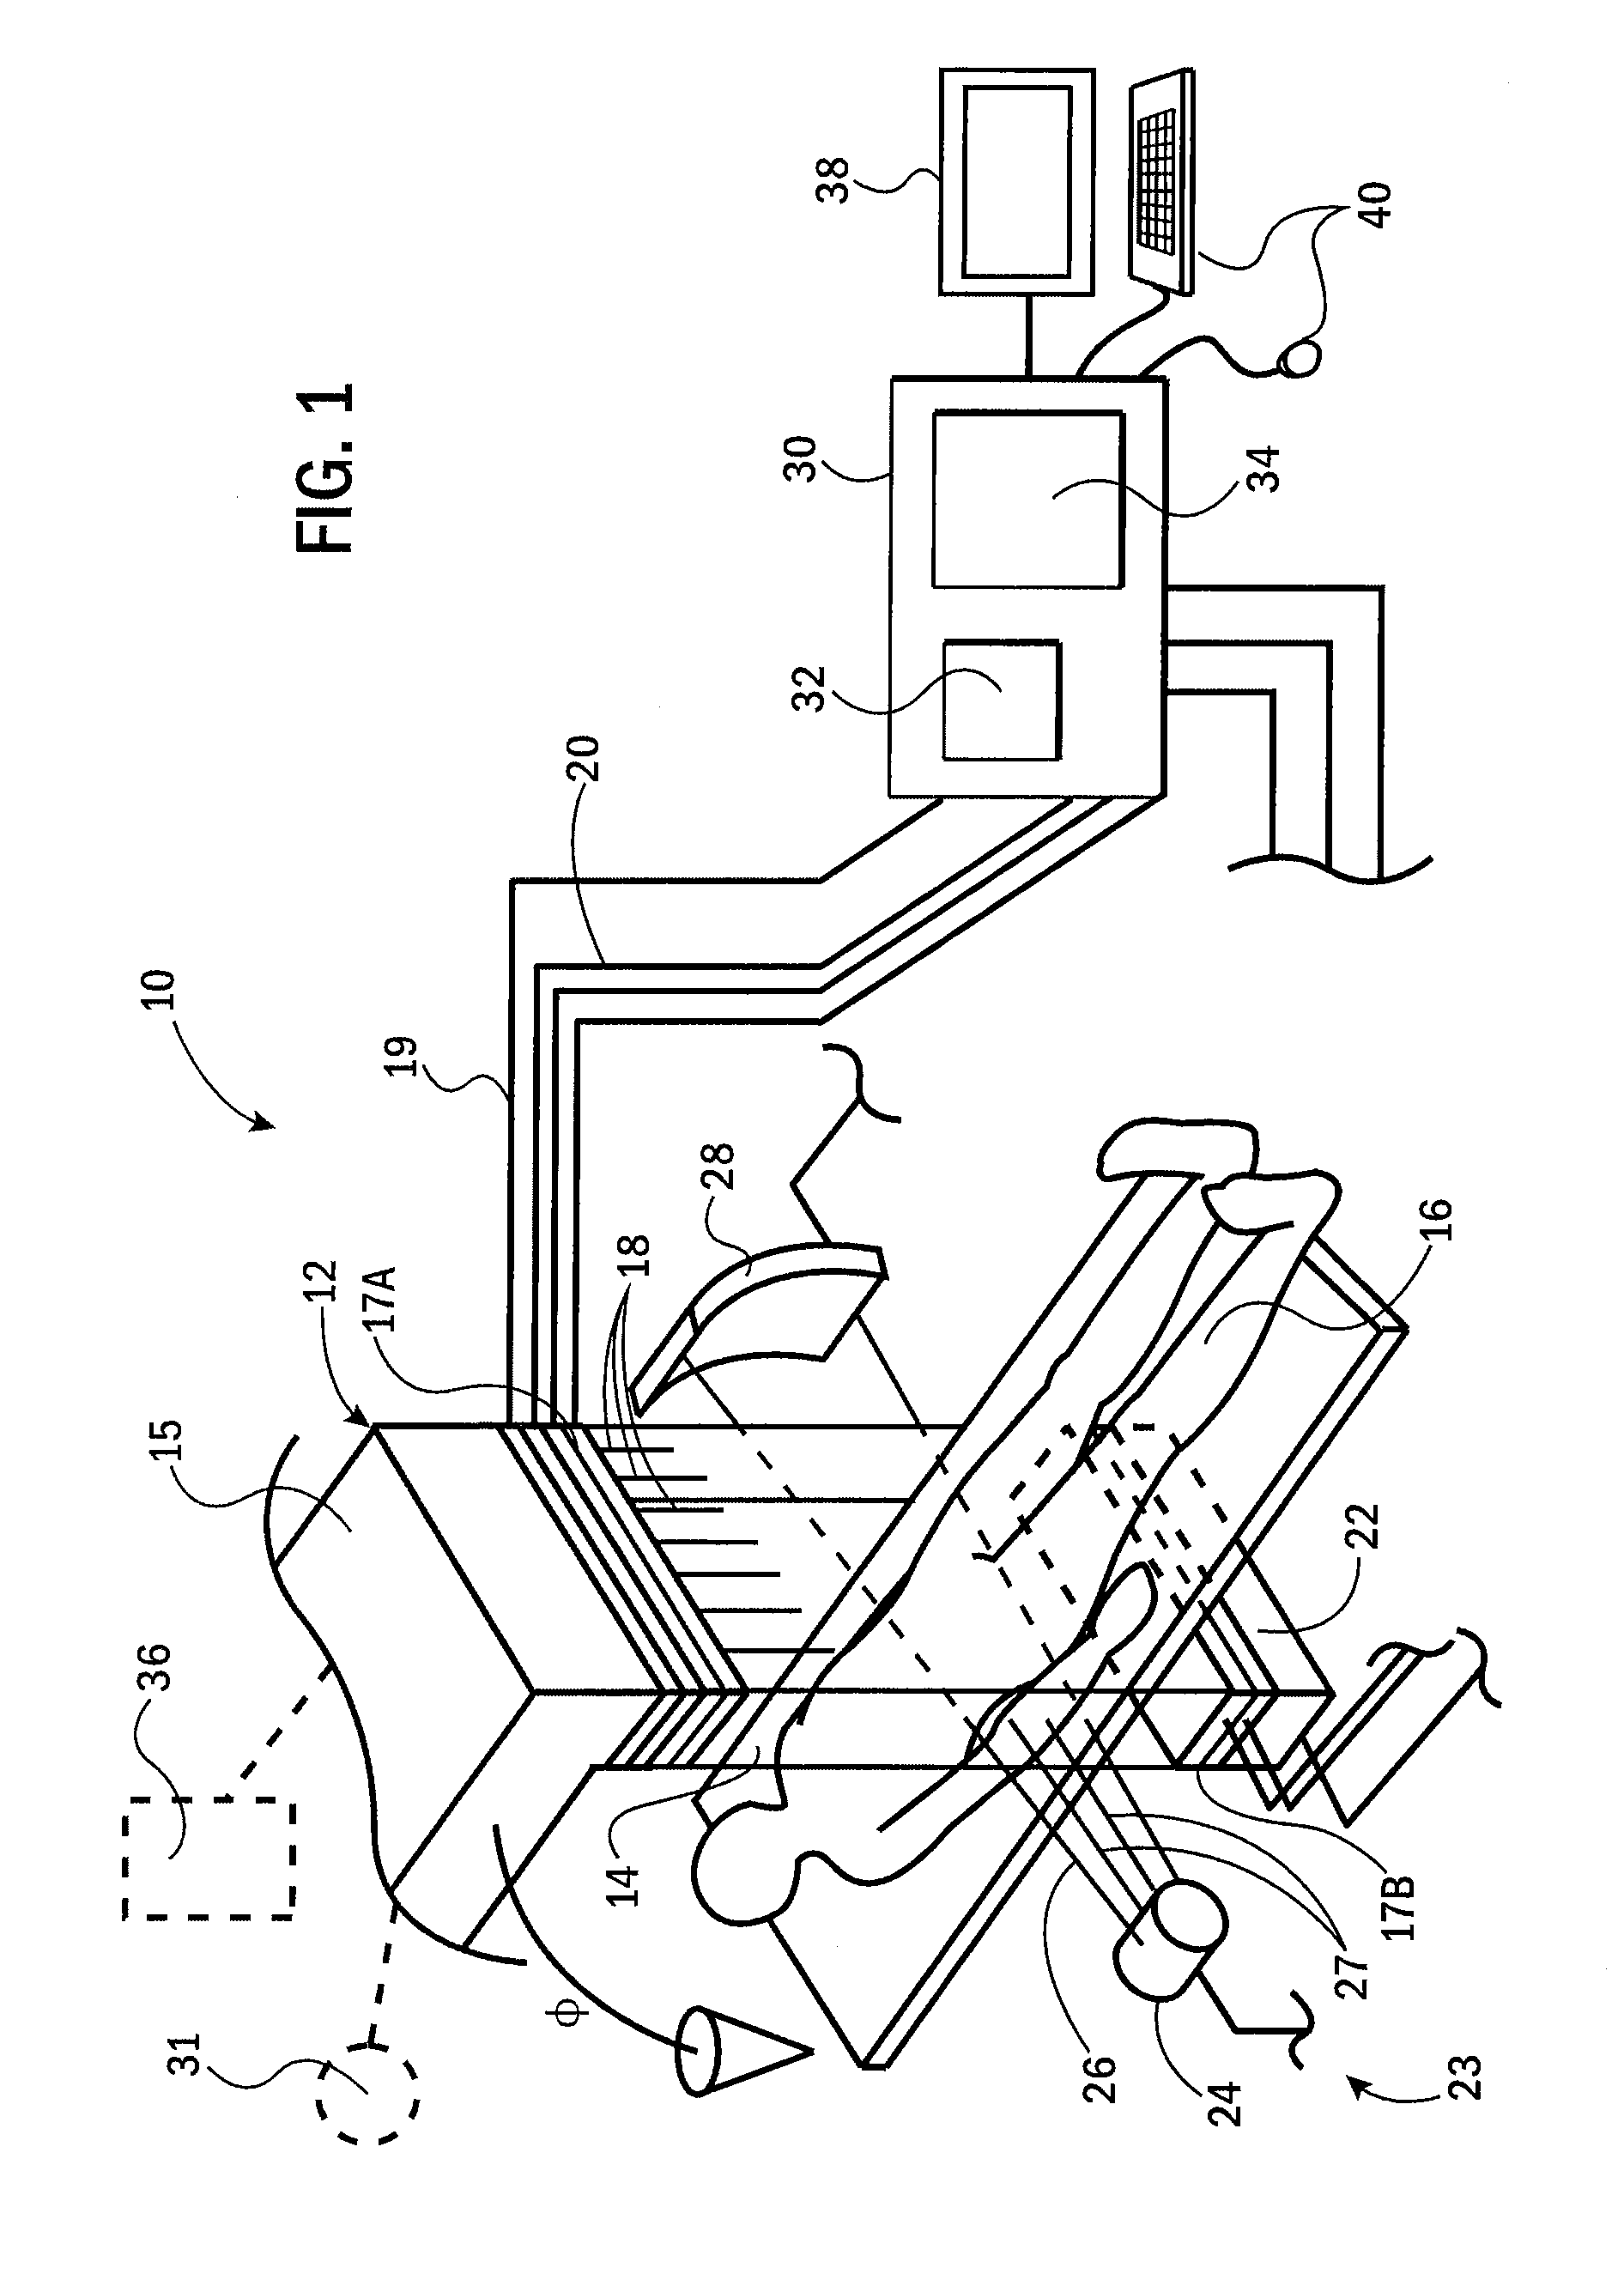 Method and apparatus for generating proton therapy treatment planning images